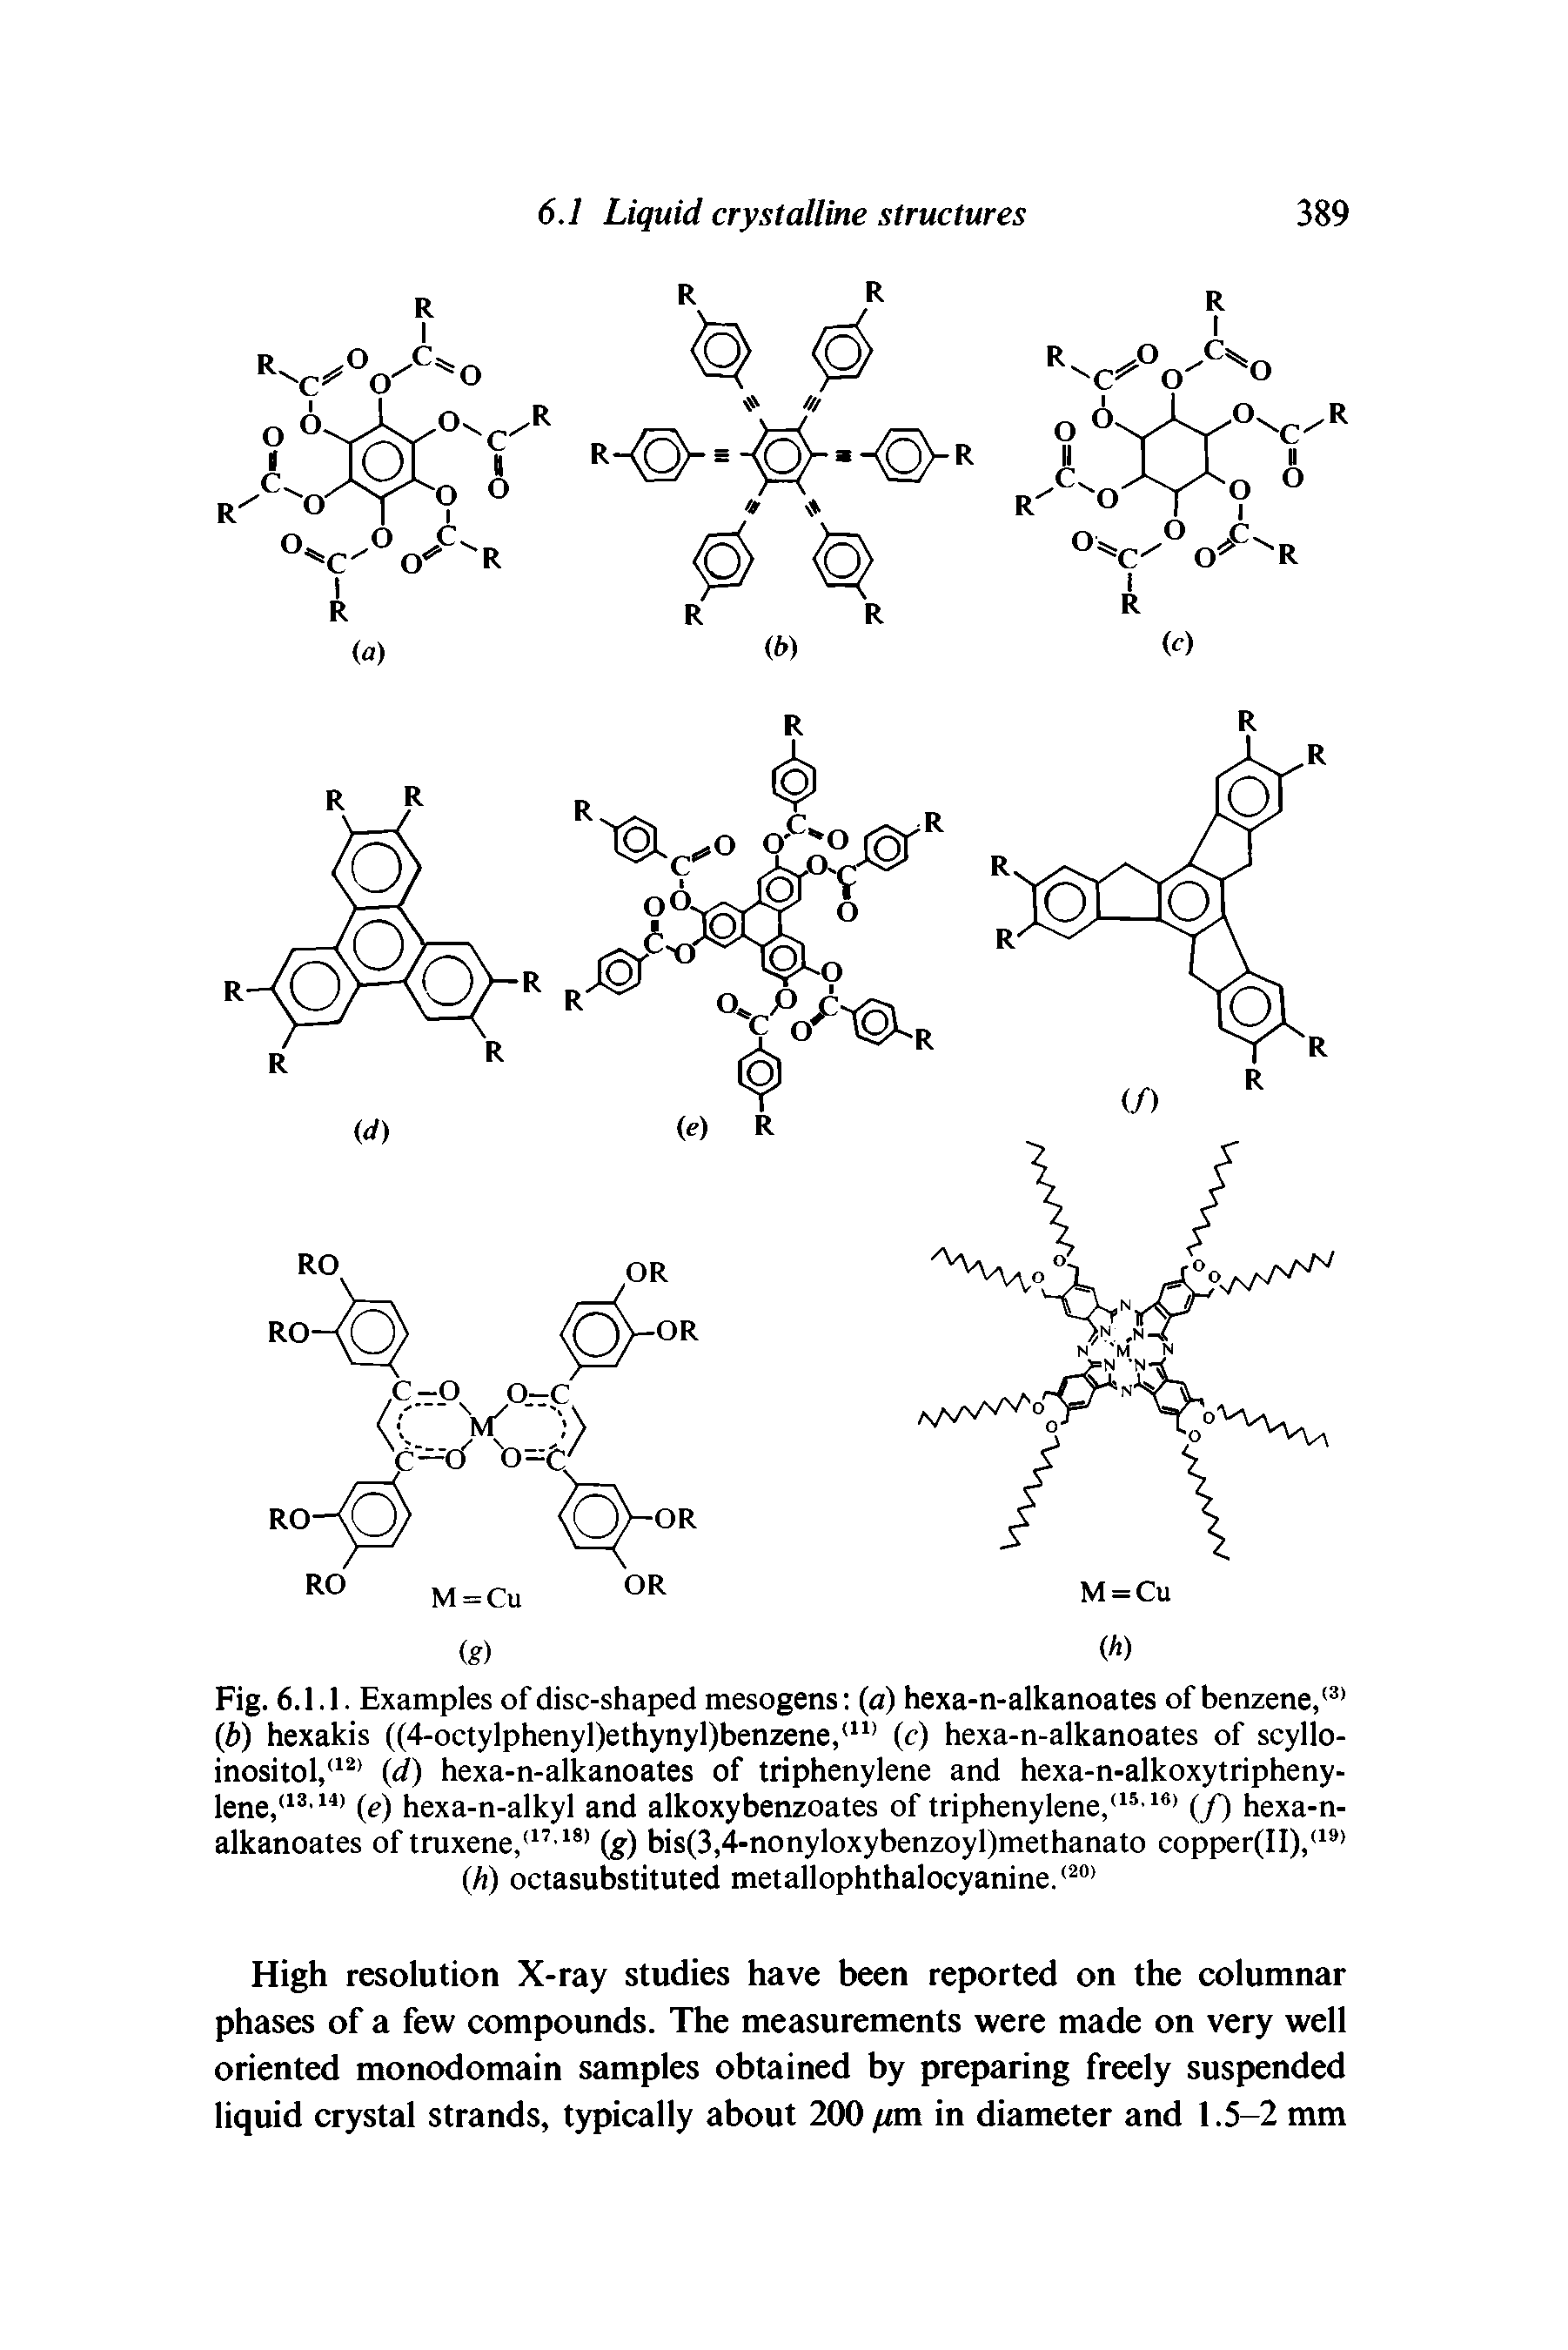 Fig. 6.1.1. Examples of disc-shaped mesogens (a) hexa-n-alkanoates of benzene, (b) hexakis ((4-octylphenyl)ethynyl)benzene, (c) hexa-n-alkanoates of scyllo-inositol, (d) hexa-n-alkanoates of triphenylene and hexa-n-alkoxytripheny-lene, (e) hexa-n-alkyl and alkoxybenzoates of triphenylene,(/) hexa-n-alkanoates of truxene, - (g) bis(3, nonyloxybenzoyl)methanato copper(II), > (/)) octasubstituted metallophthalocyanine. ...